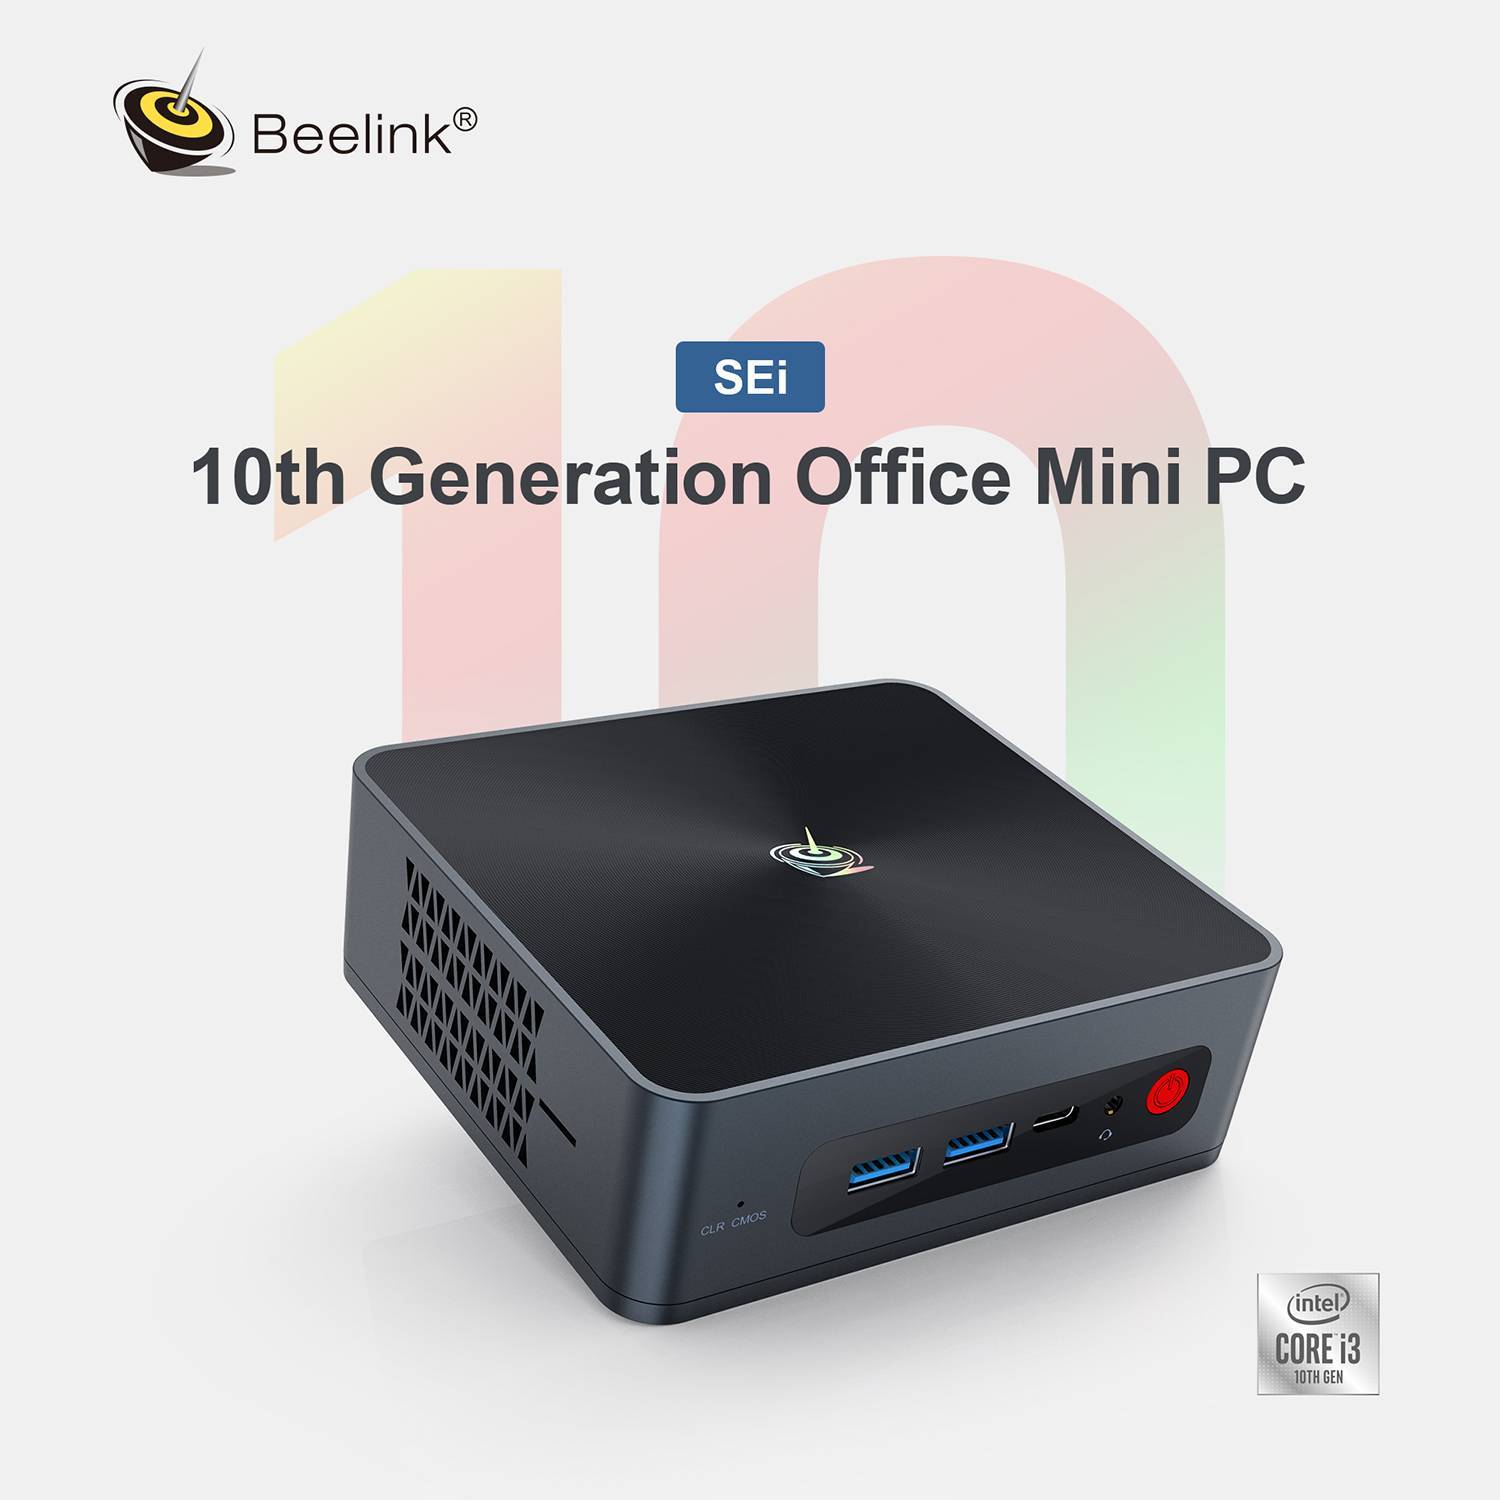 Beelink SEi 10 i3 Mini PC showing product overview